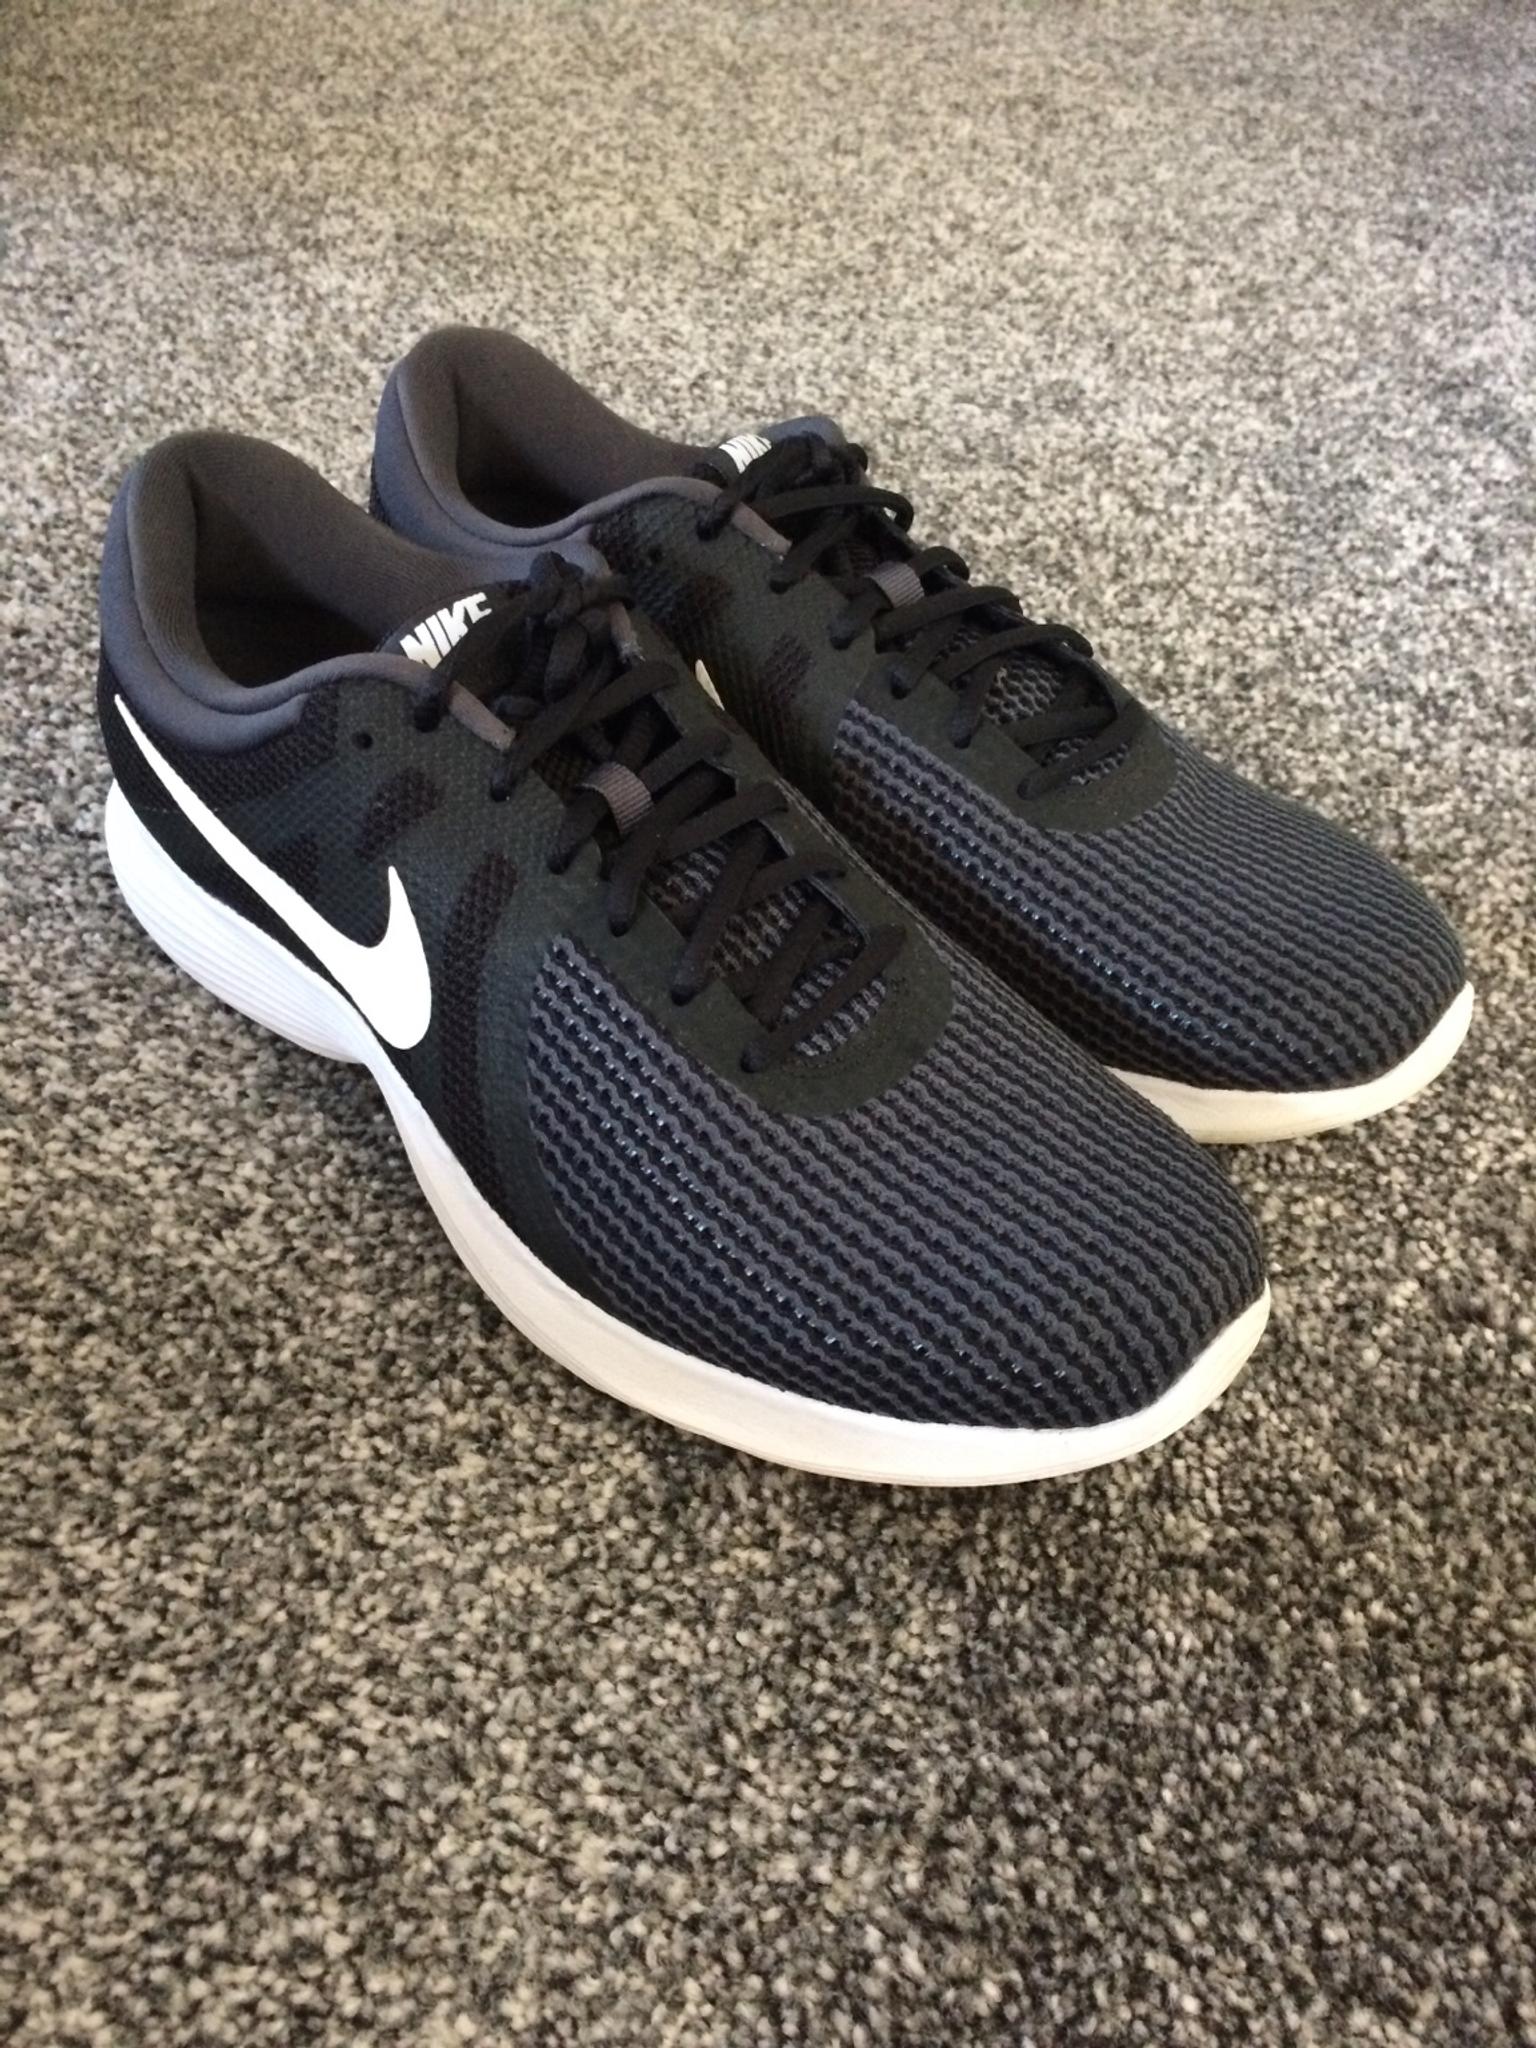 size 10 nike trainers